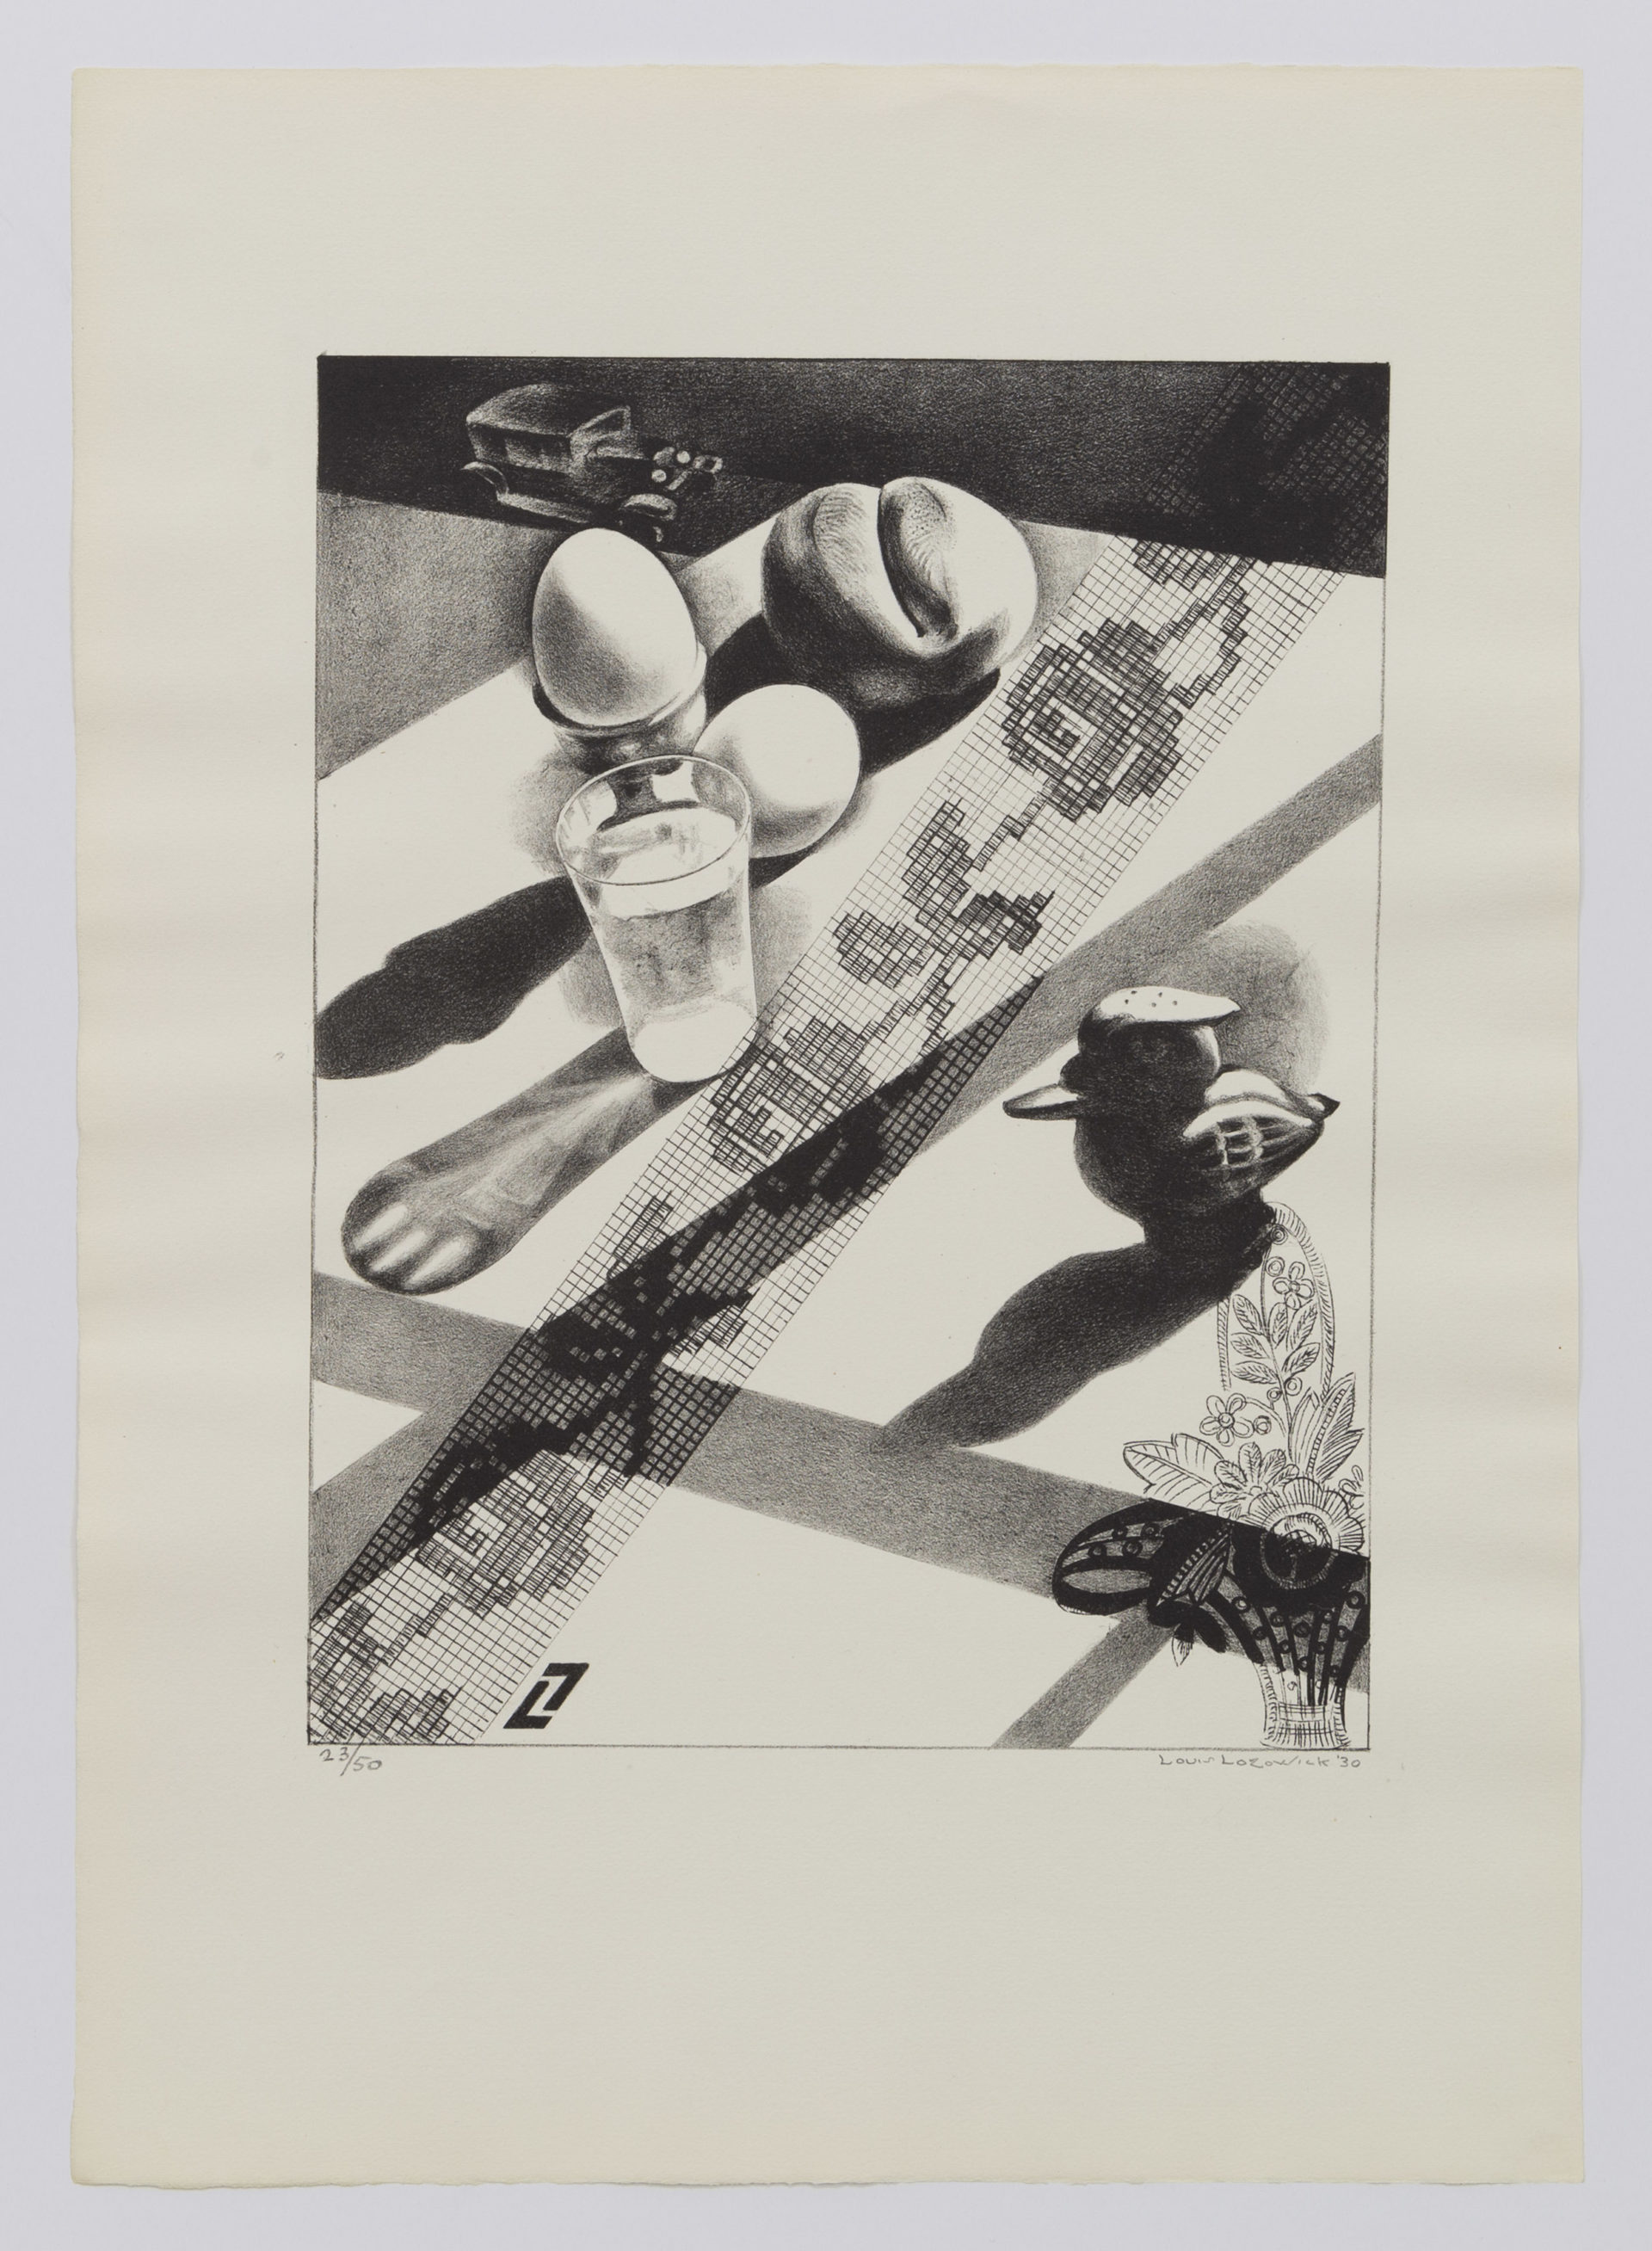 Louis Lozowick Breakfast (Still Life, Breakfast), 1929 Lithograph Image Dimensions: 10 3/8 x 8 inches (26.4 x 20.3 cm) Paper Dimensions: 15 7/8 x 11 3/8 inches (40.3 x 28.9 cm) Edition of 50